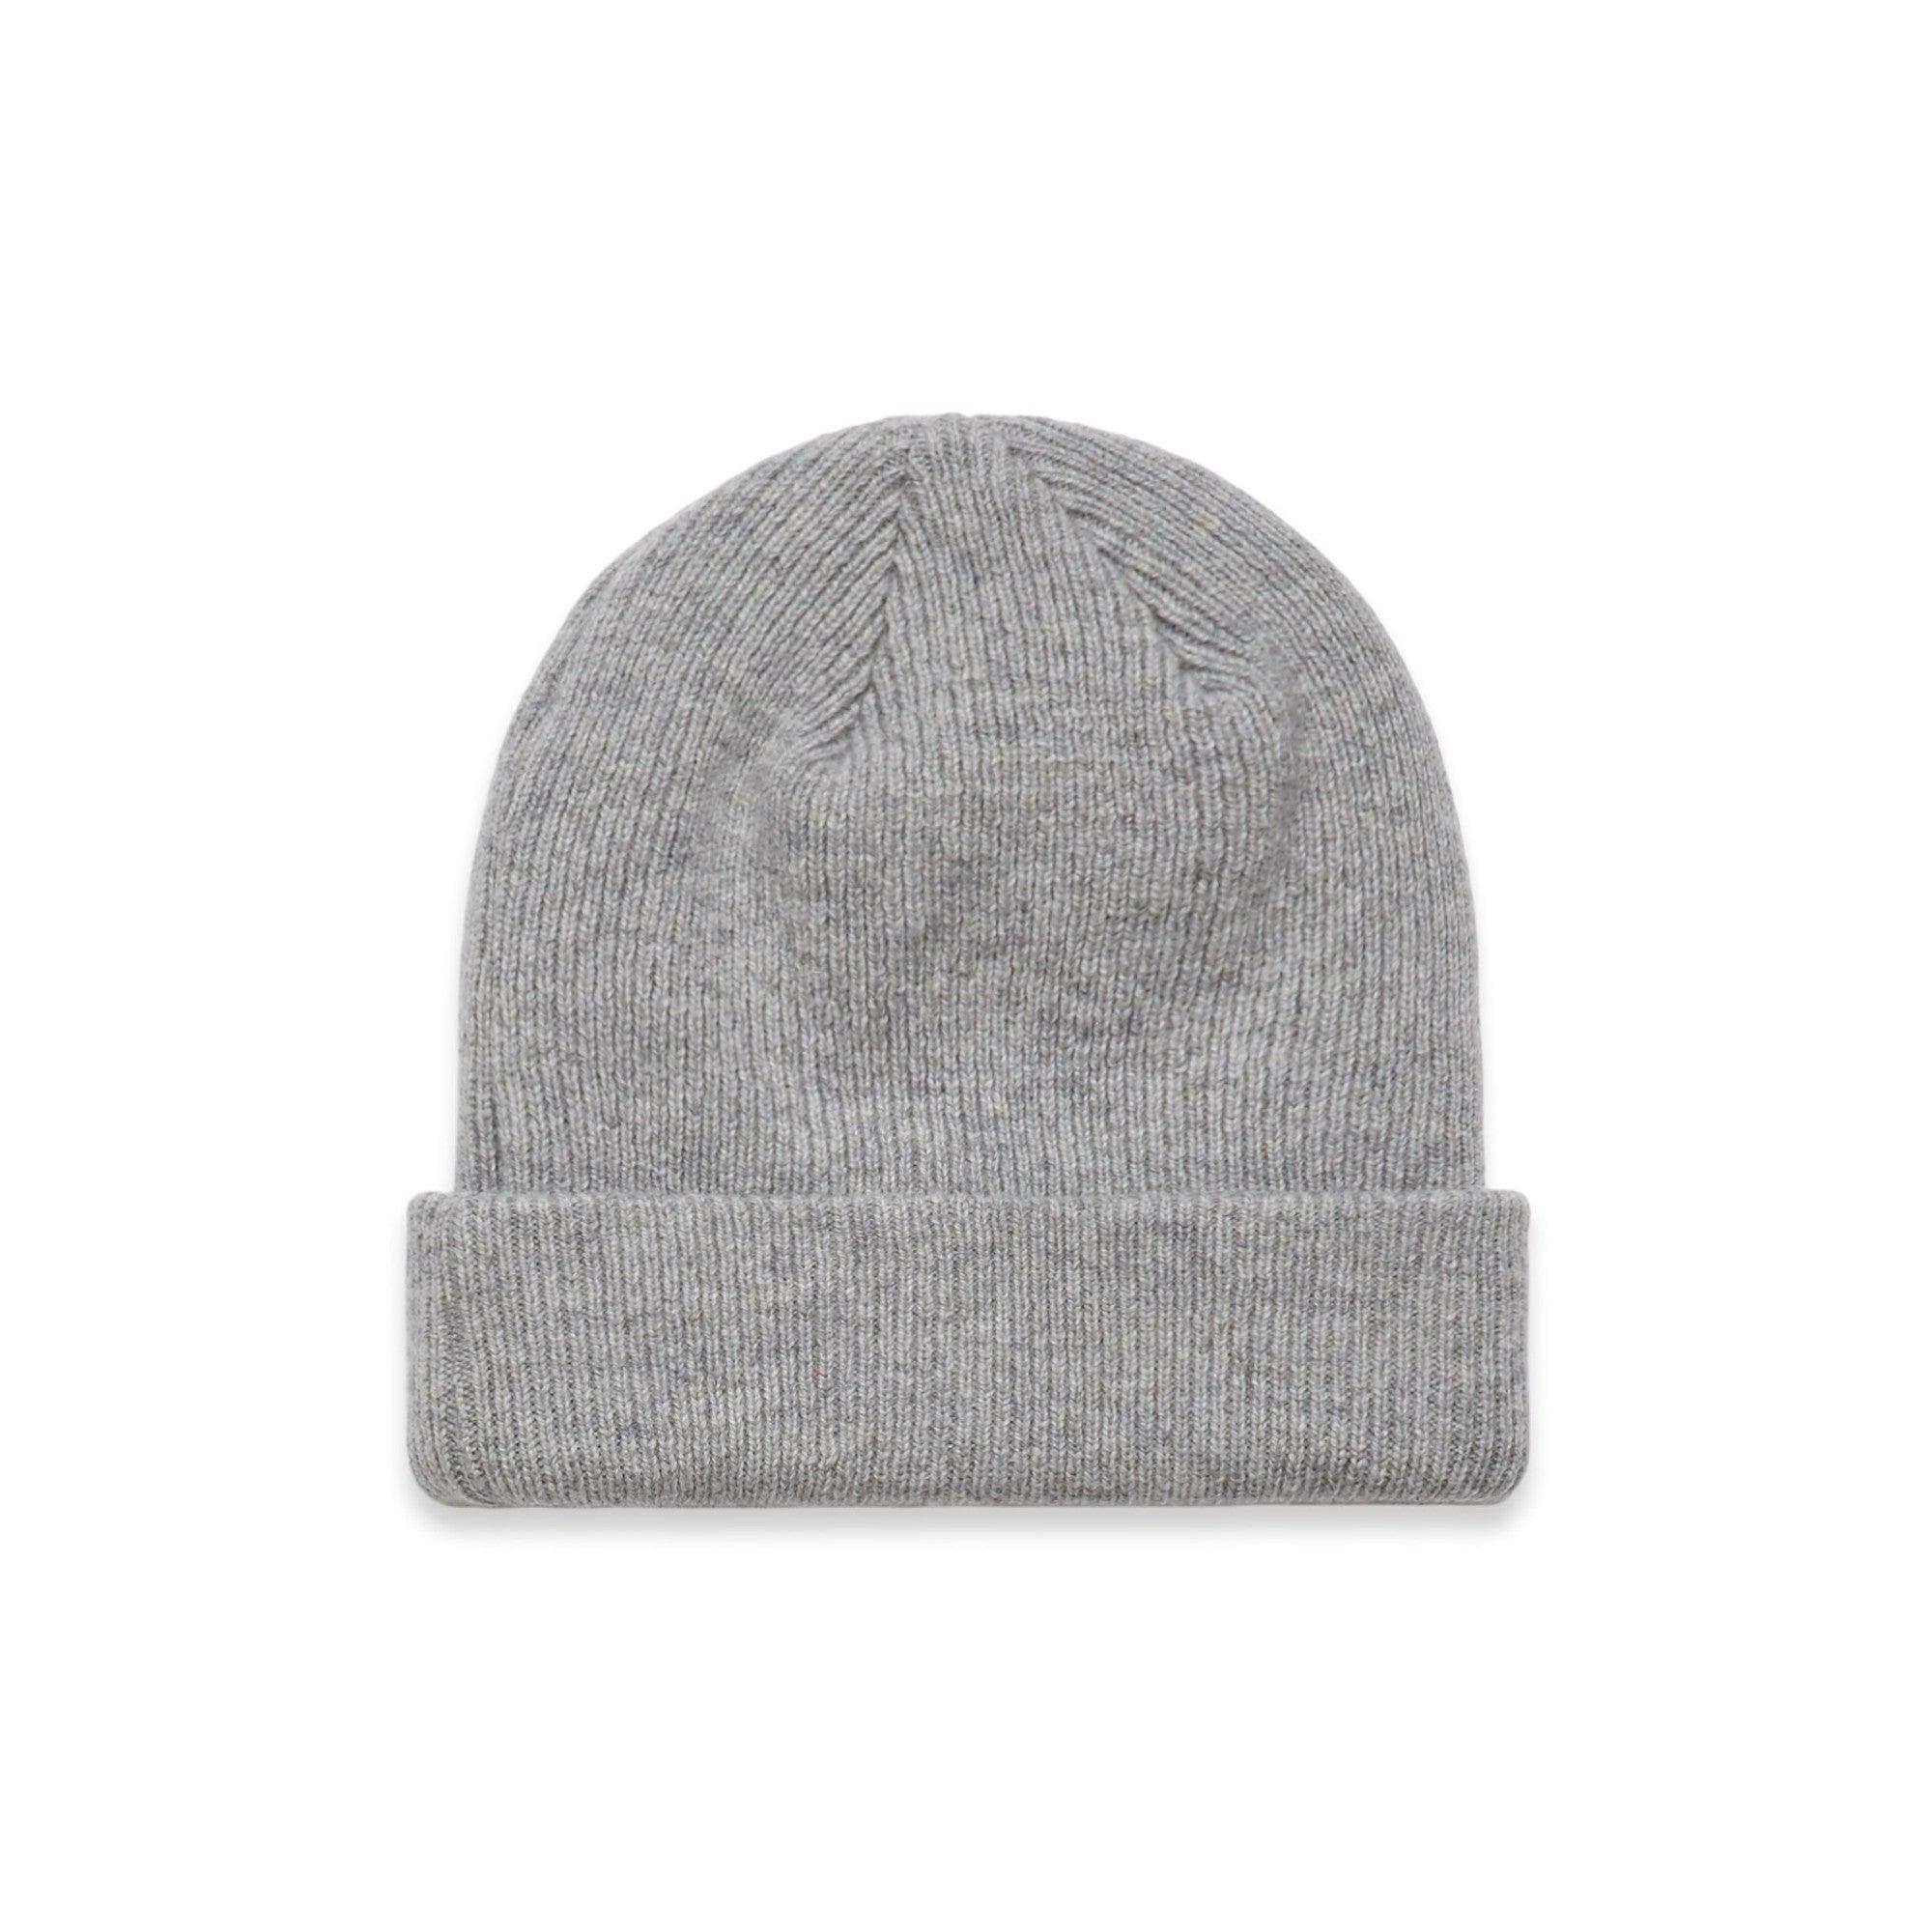 Knit Beanie - 1115 - Colortex Screen Printing & Embroidery